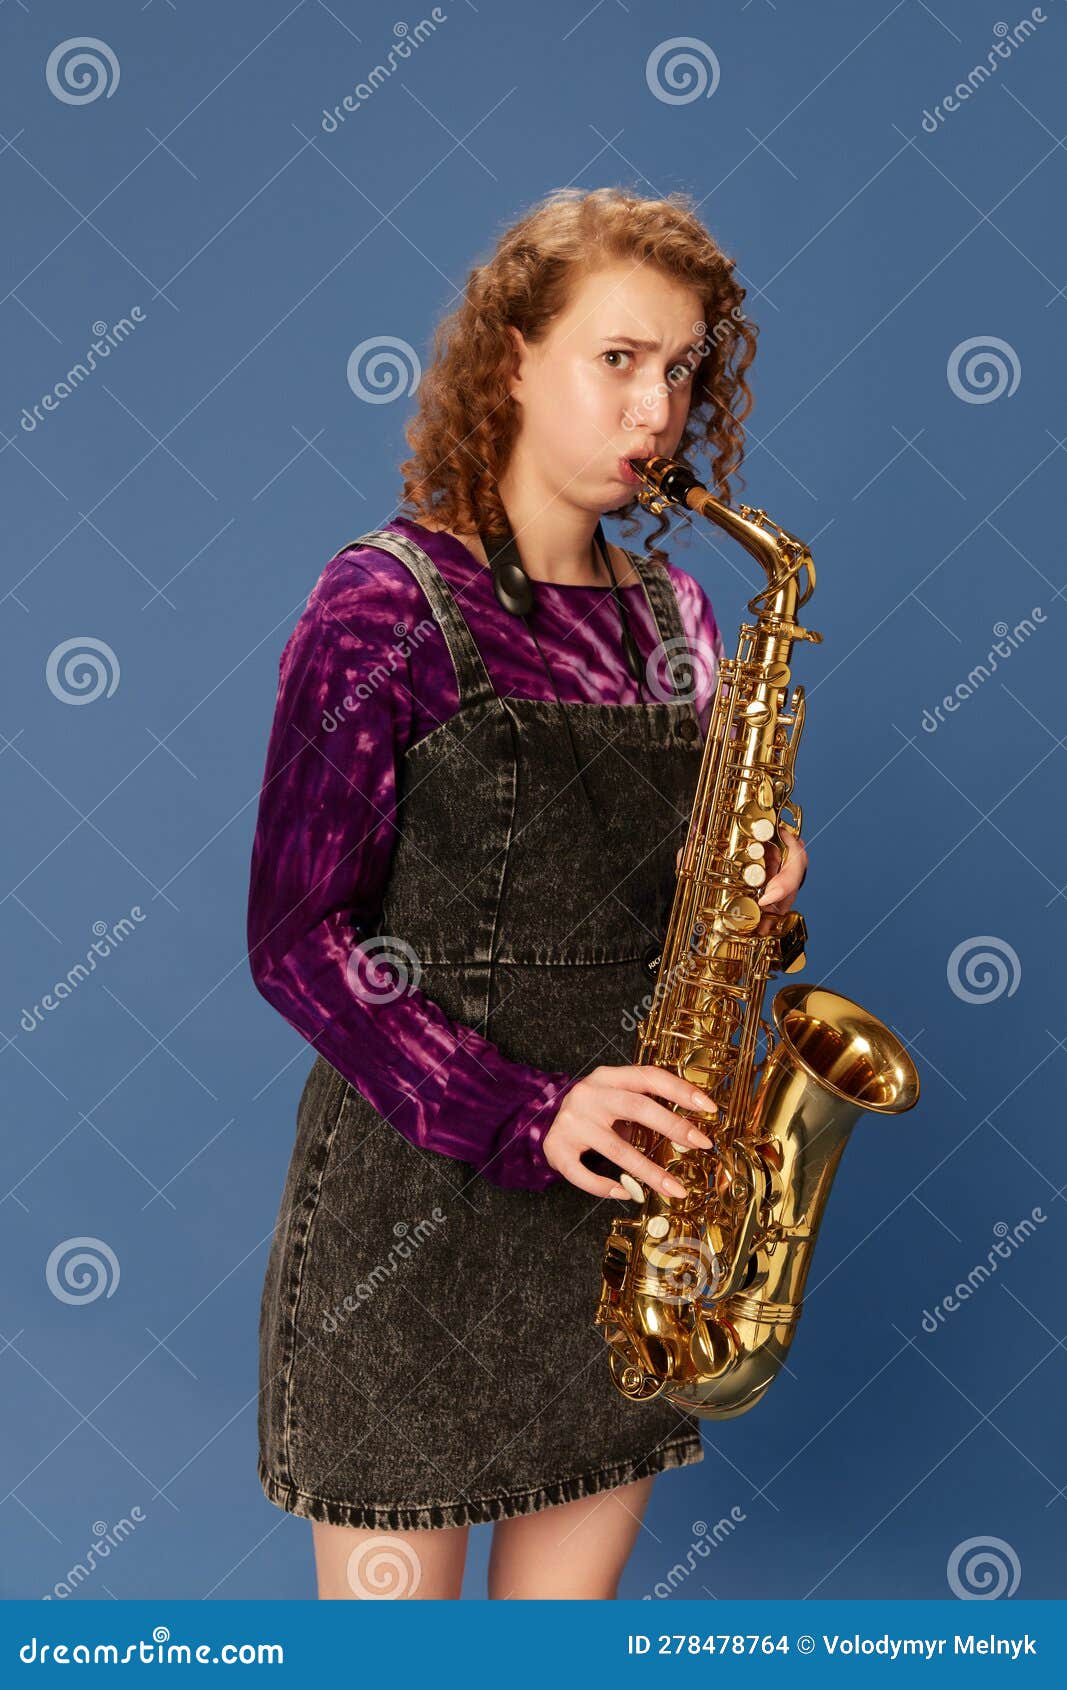 Portrait of Emotional Young Girl in Dress Playing Saxophone Against ...